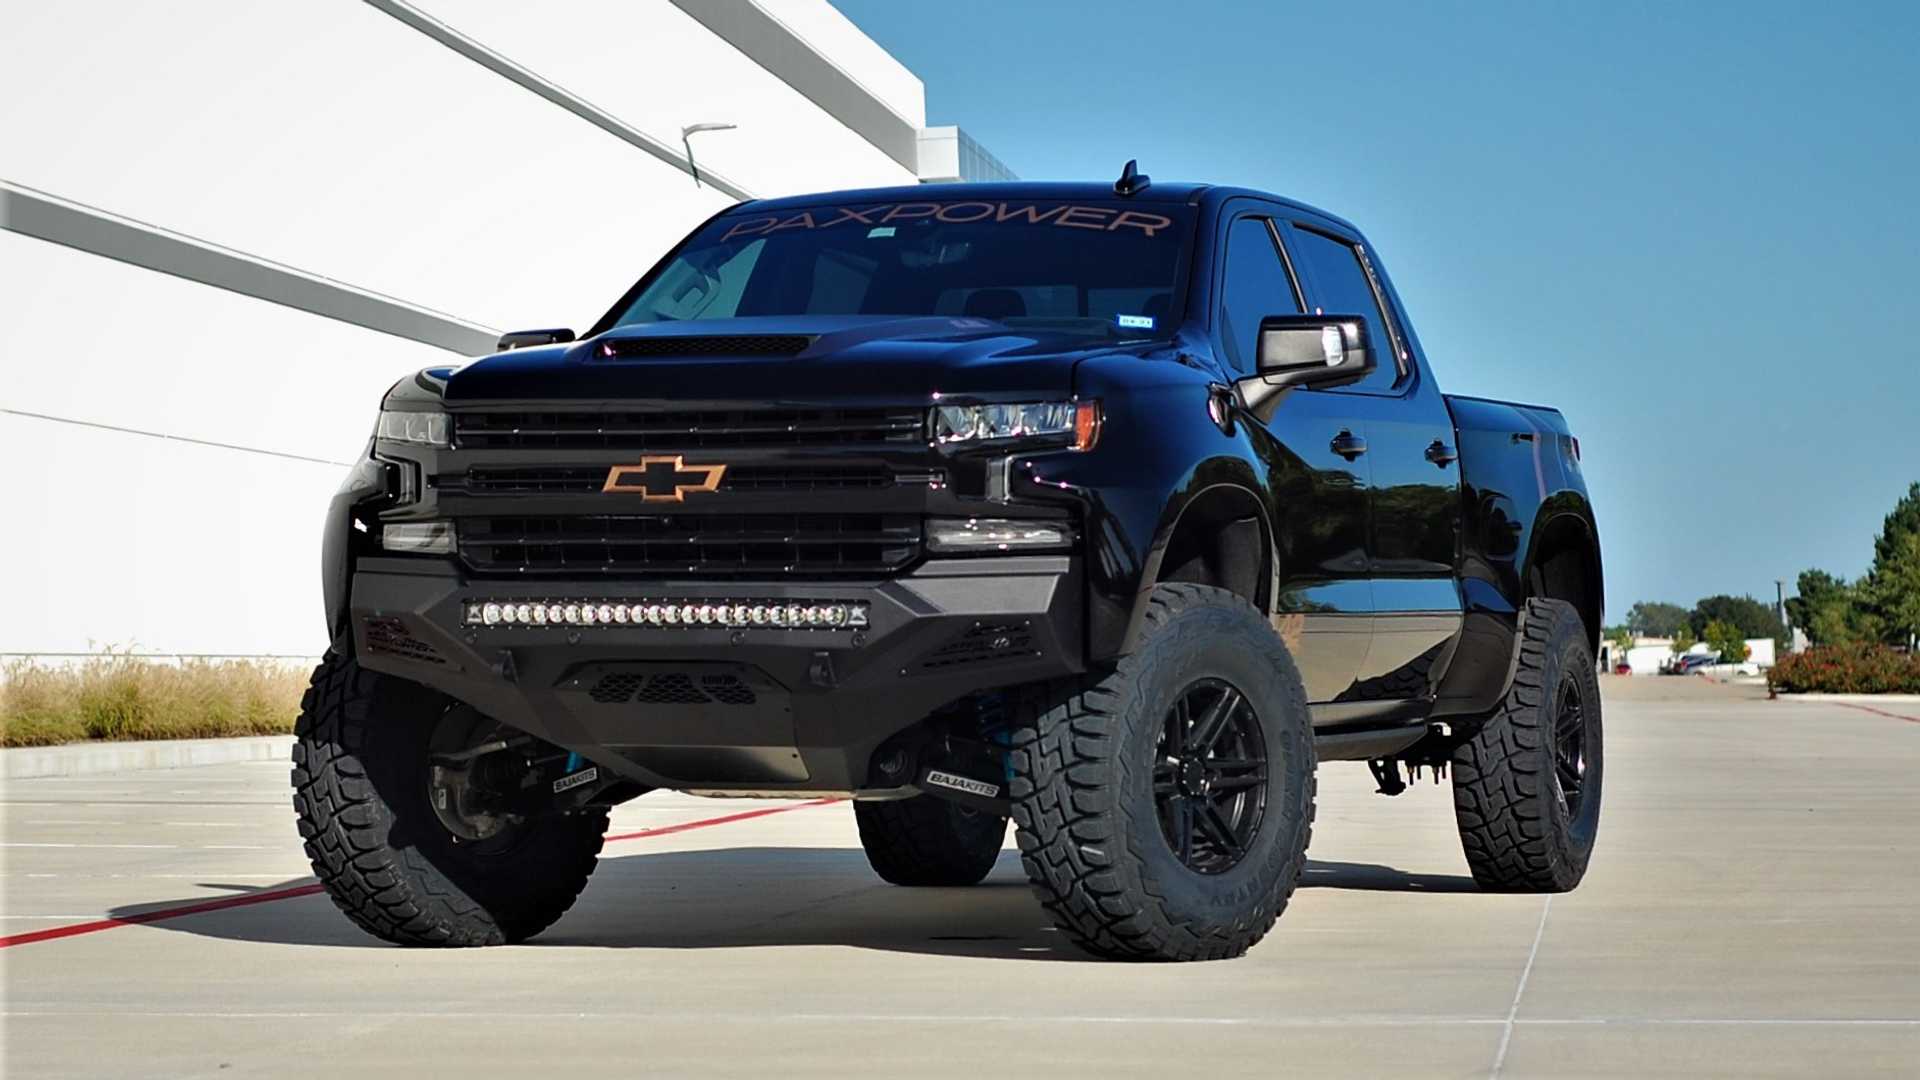 Chevrolet Silverado 1500-Based PaxPower Jackal Looks Ready for Off ...